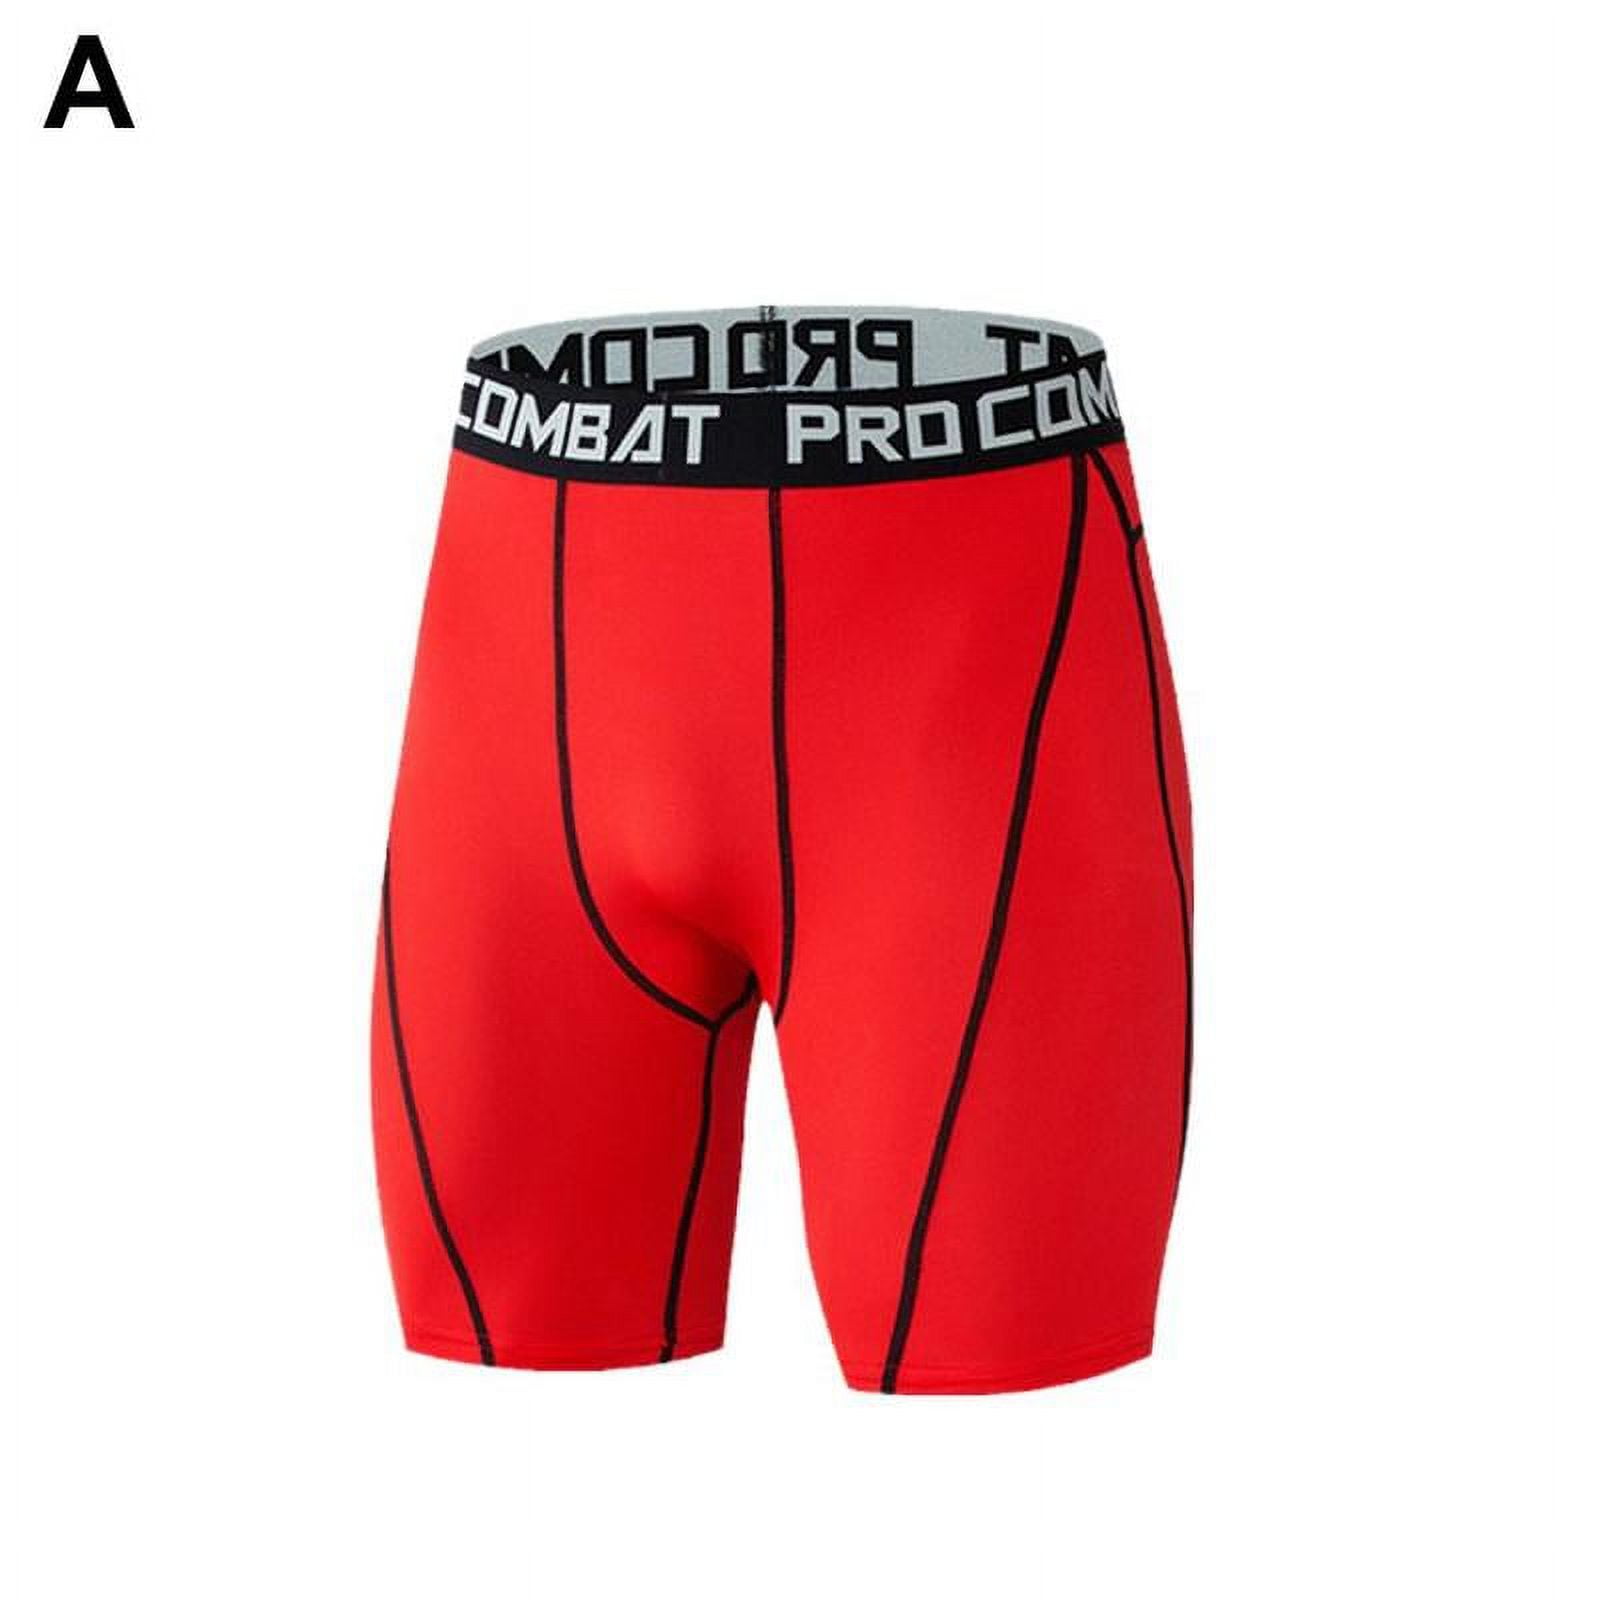 Meitianfacai Shorts Men Gifts for Boyfriend Men's Fitness Pants Three-point  Pants Sports Shorts Quick-drying Pants Red 